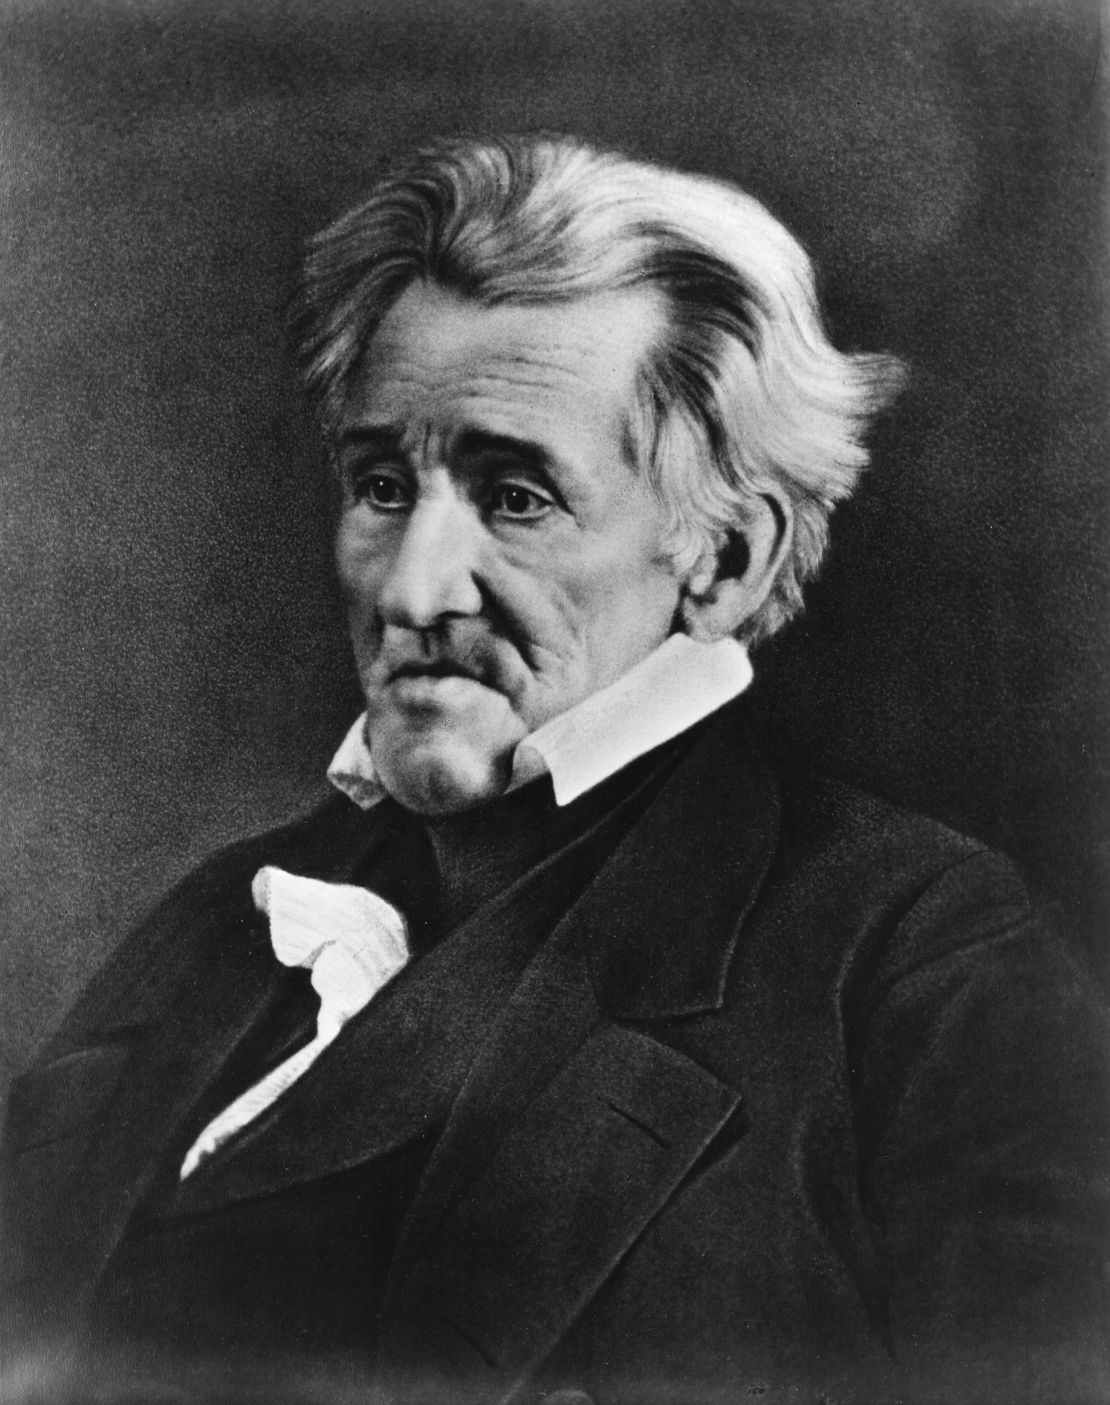 Andrew Jackson was the 7th U.S. president.